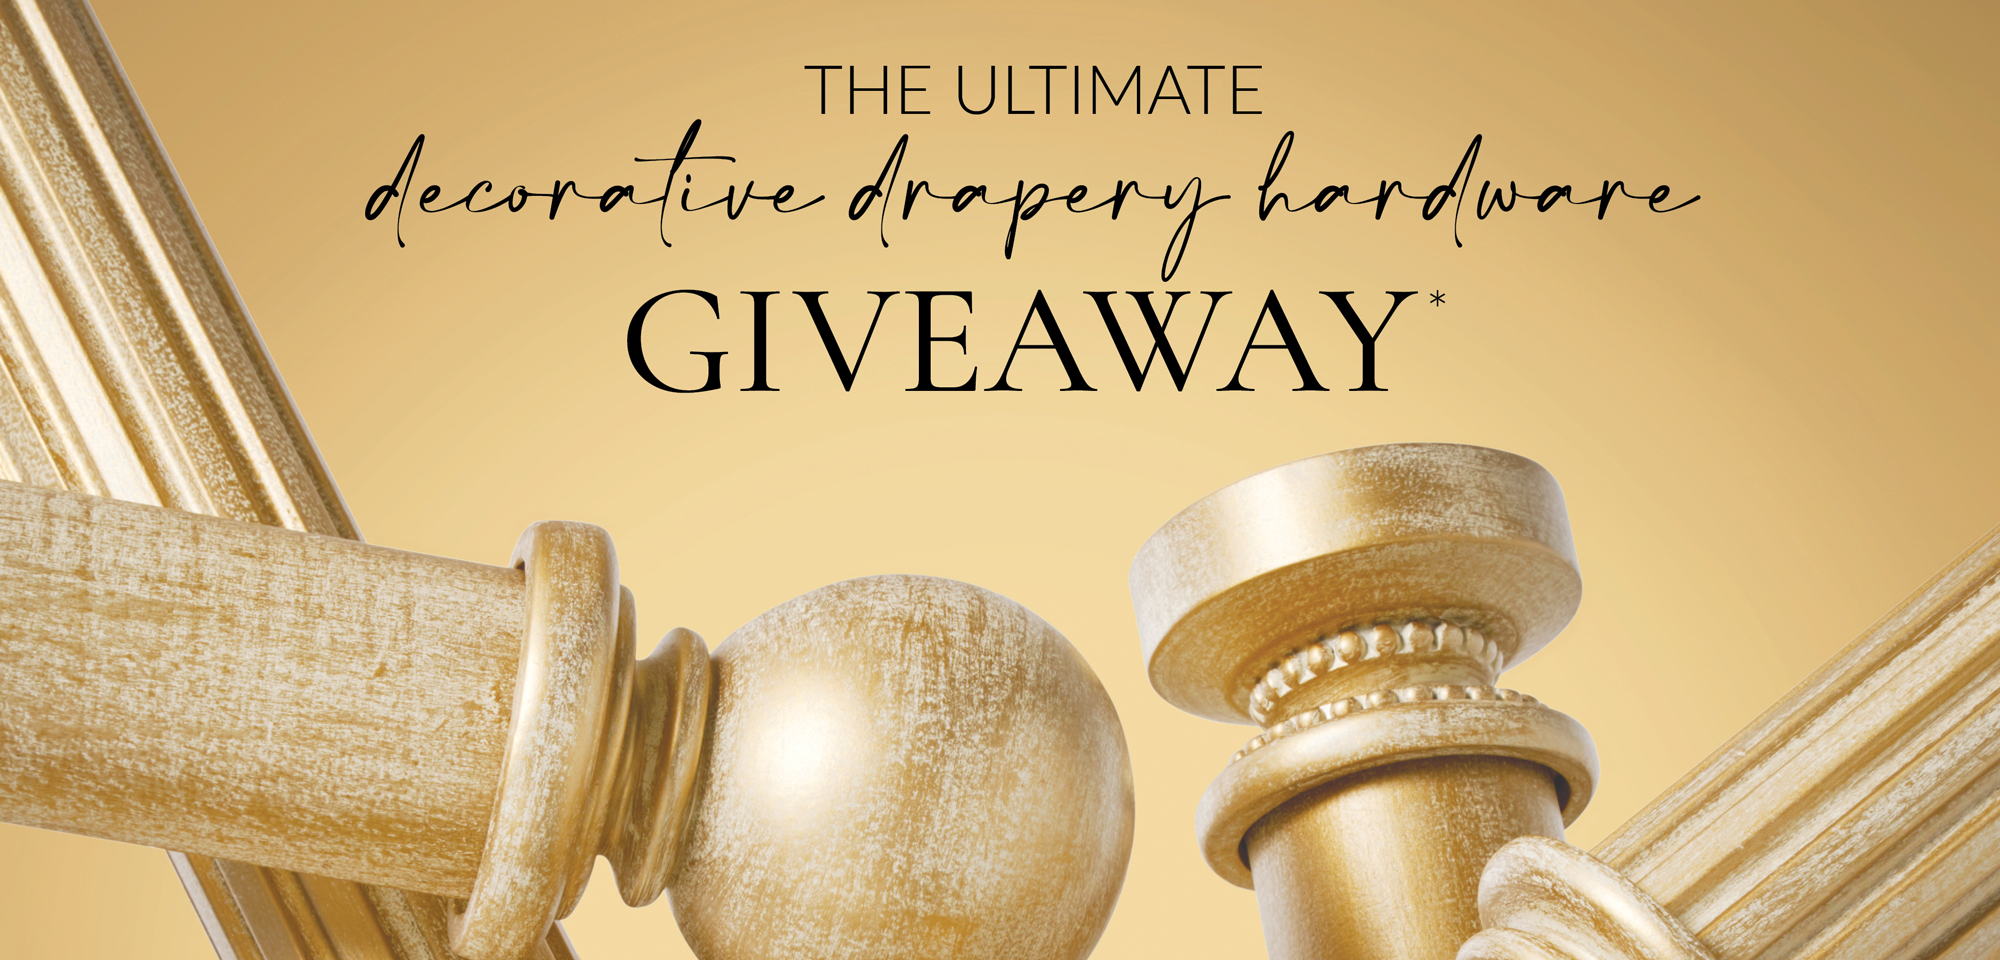 The Ultimate Decorative Drapery Hardware Giveaway